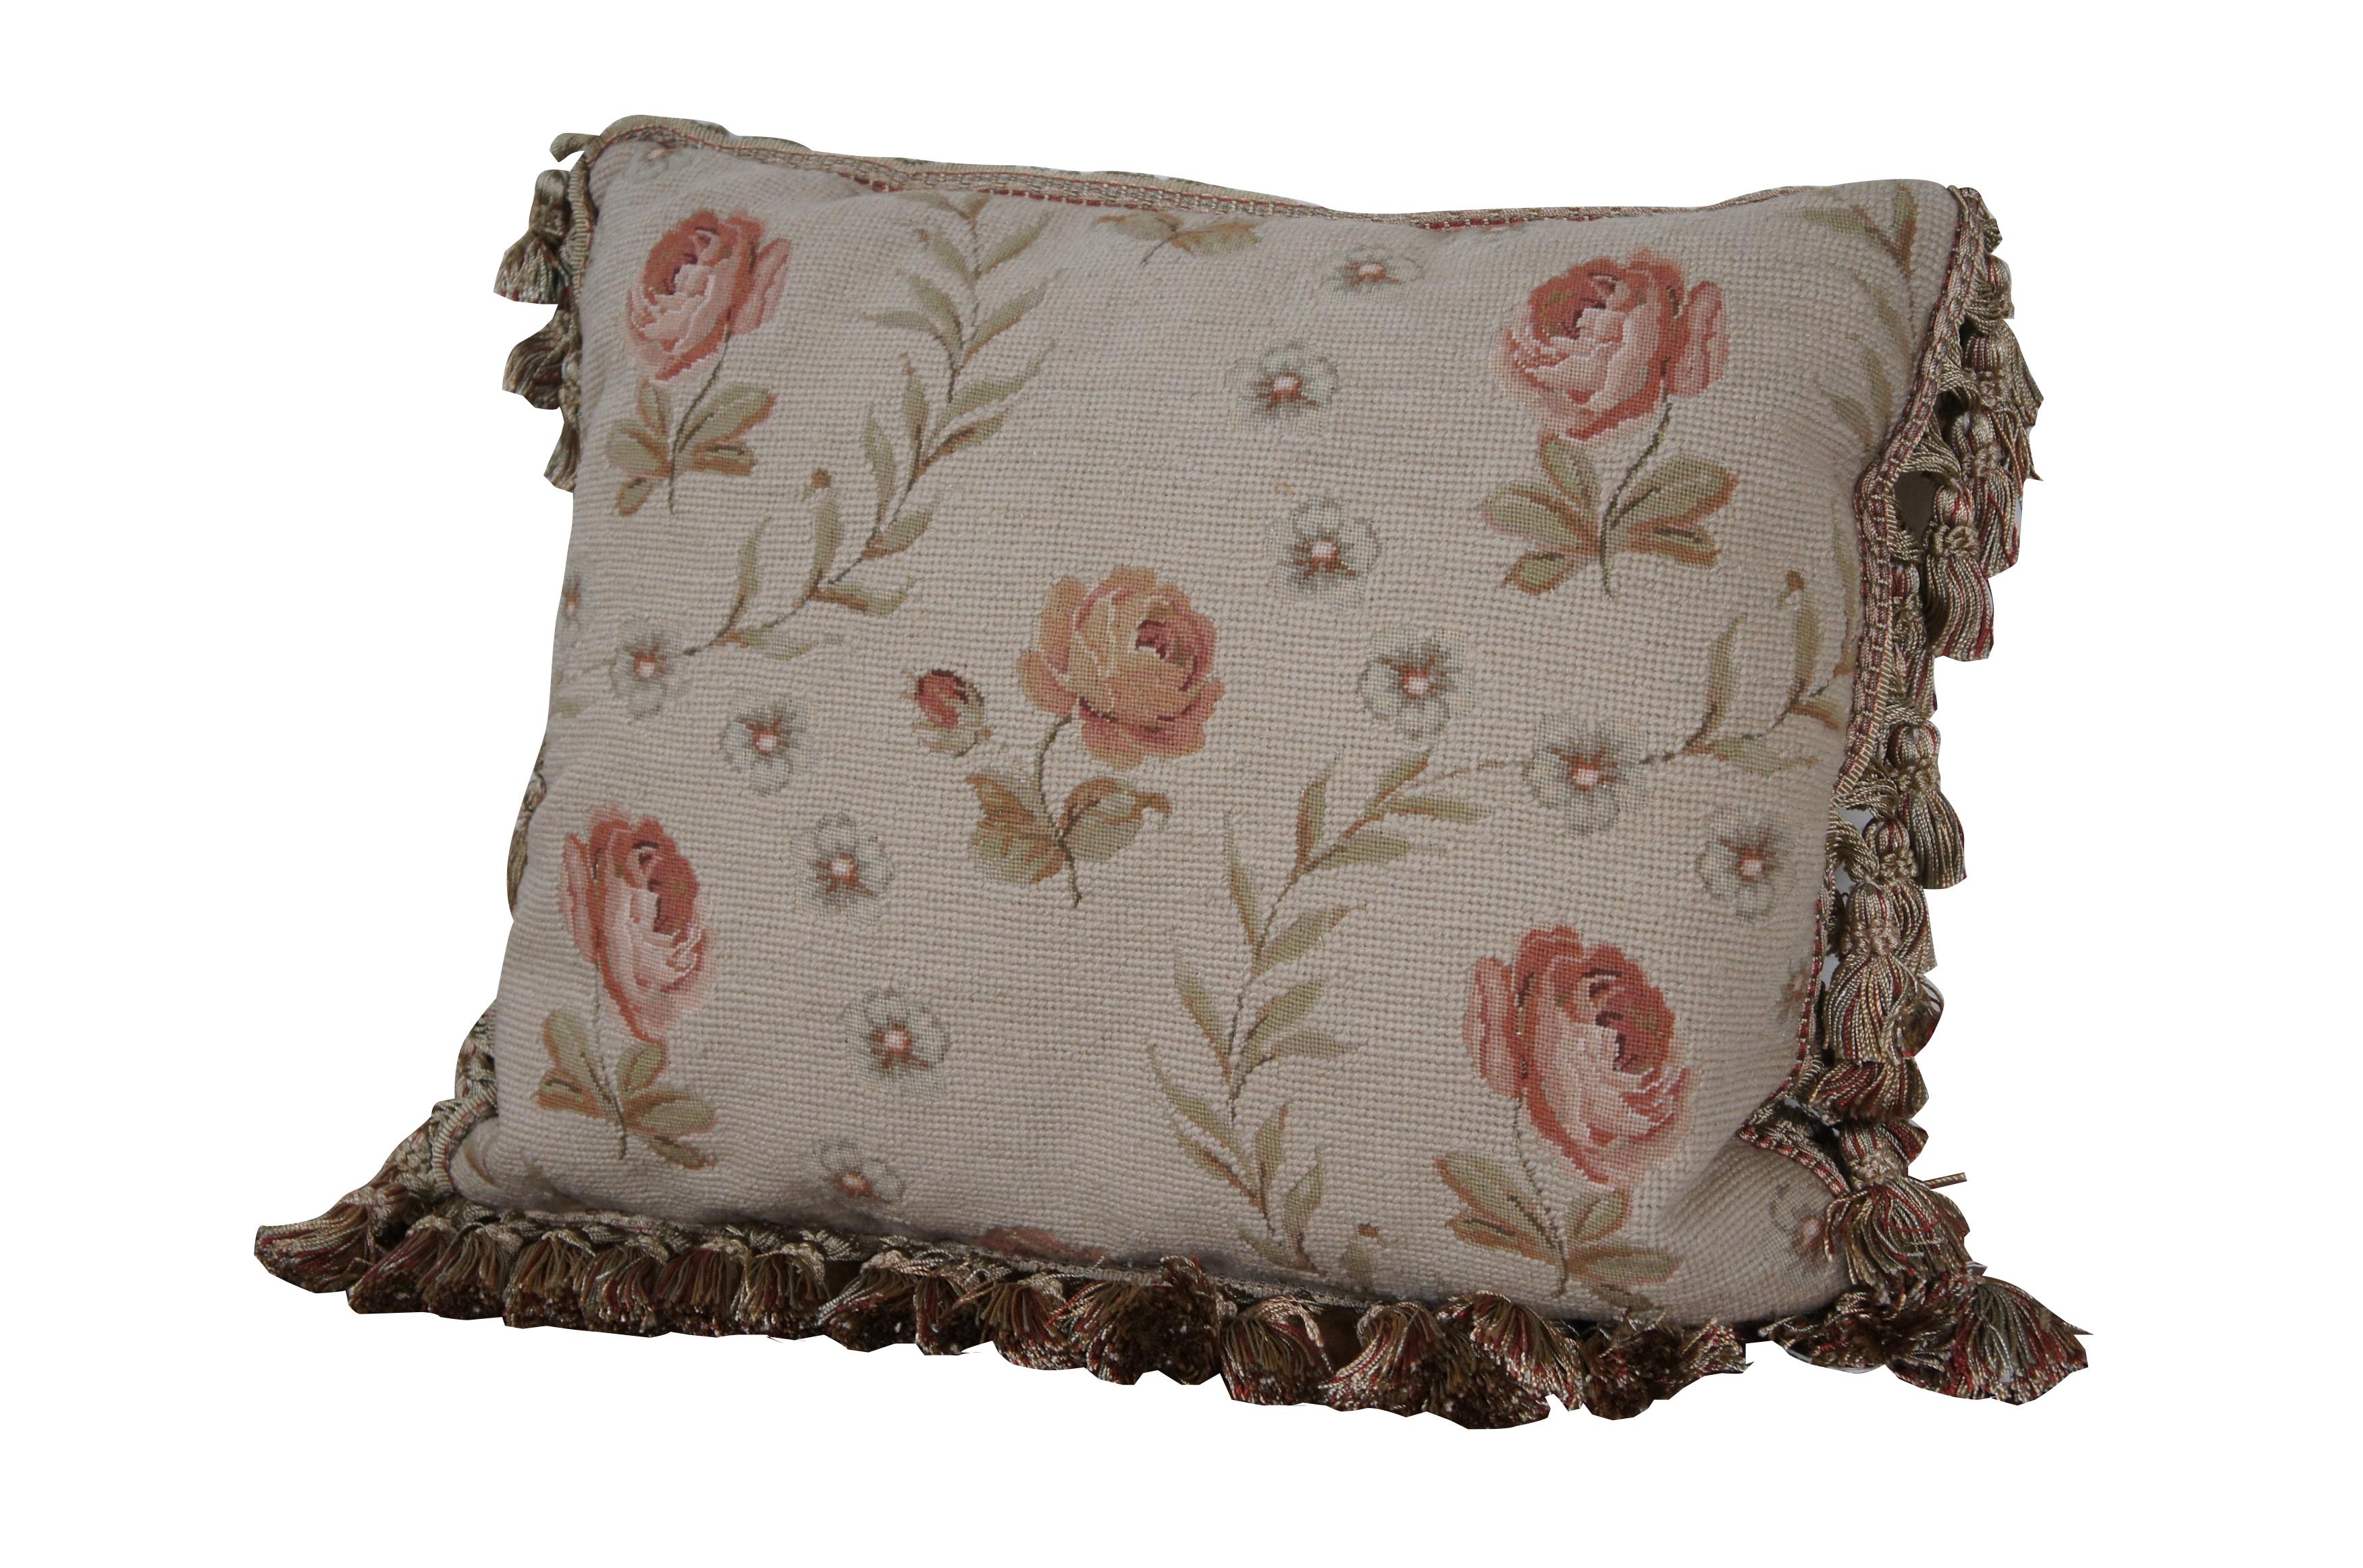 20th century rectangular needlepoint lumbar / throw pillow, hand embroidered with pink roses, separated by arching stems of leaves and light green flowers. Red and beige tassel trim. Beige velour back with zipper closure. Down